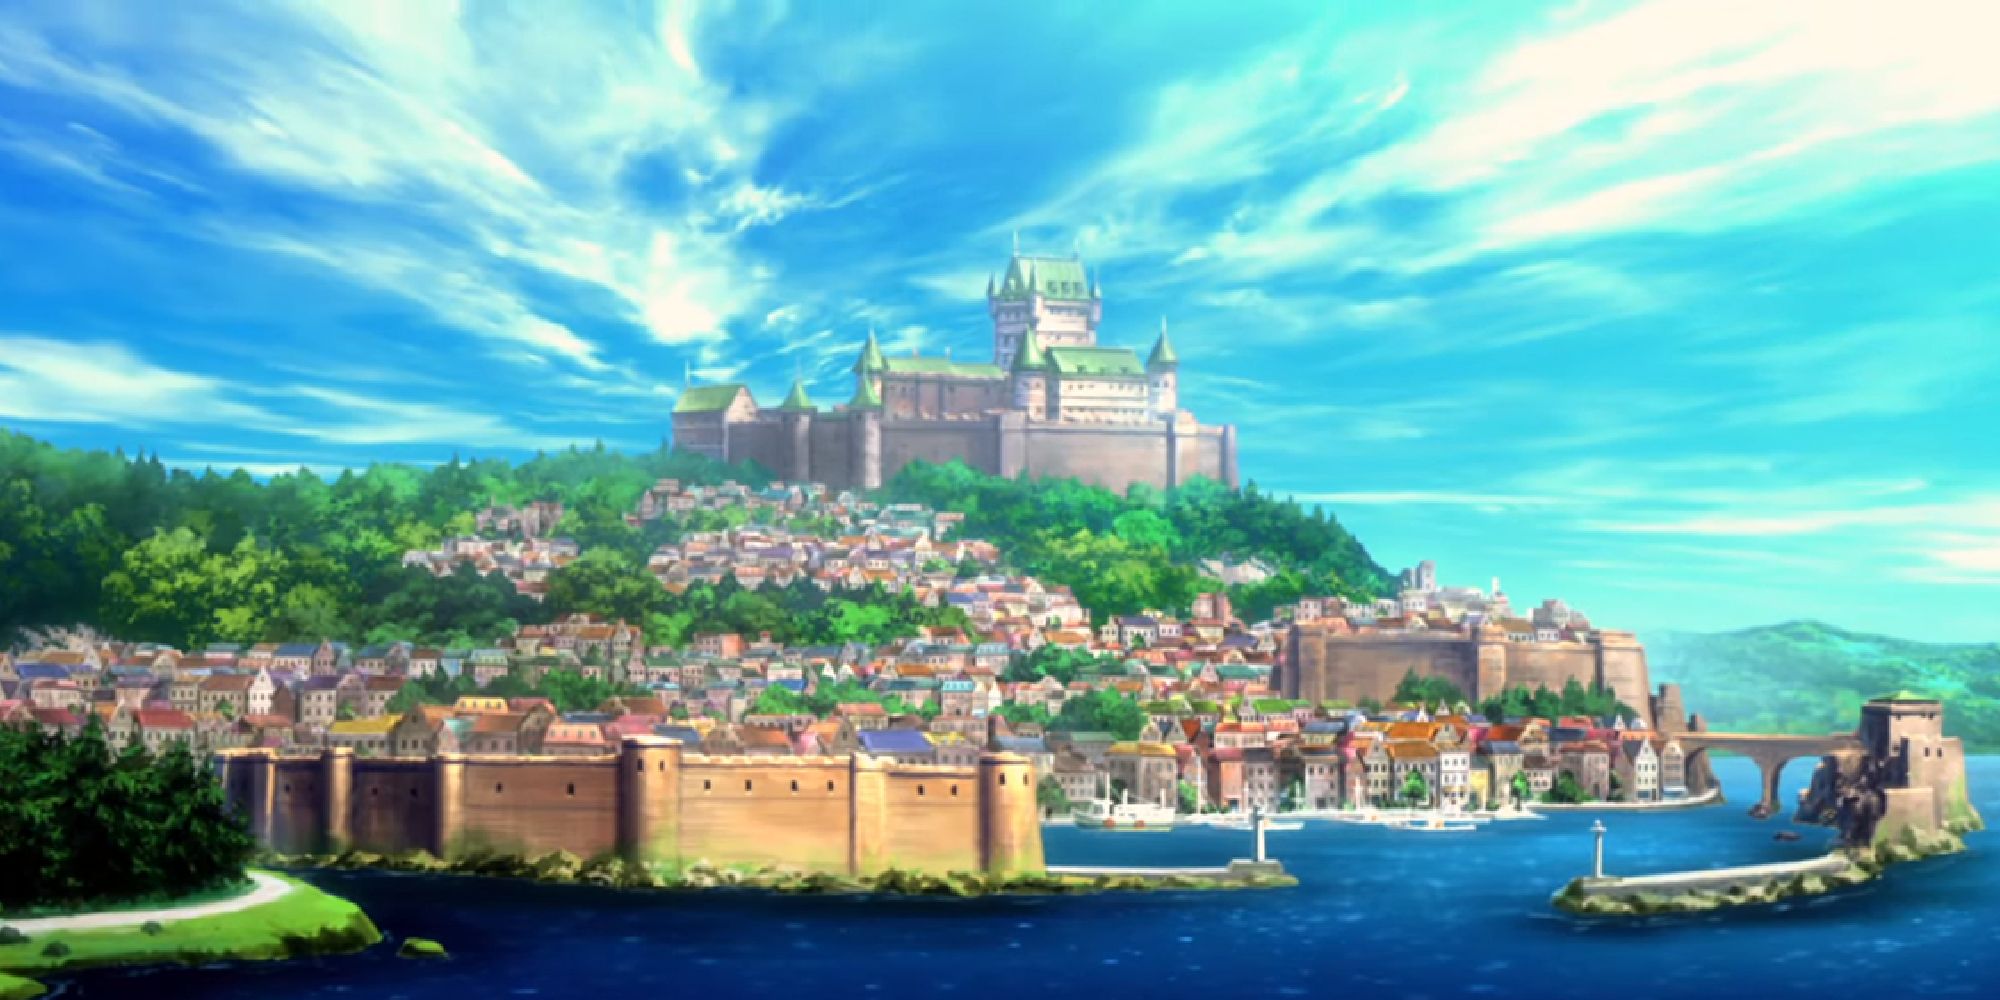 Avignon Town in the Kalos region from the Pokemon X&Y anime